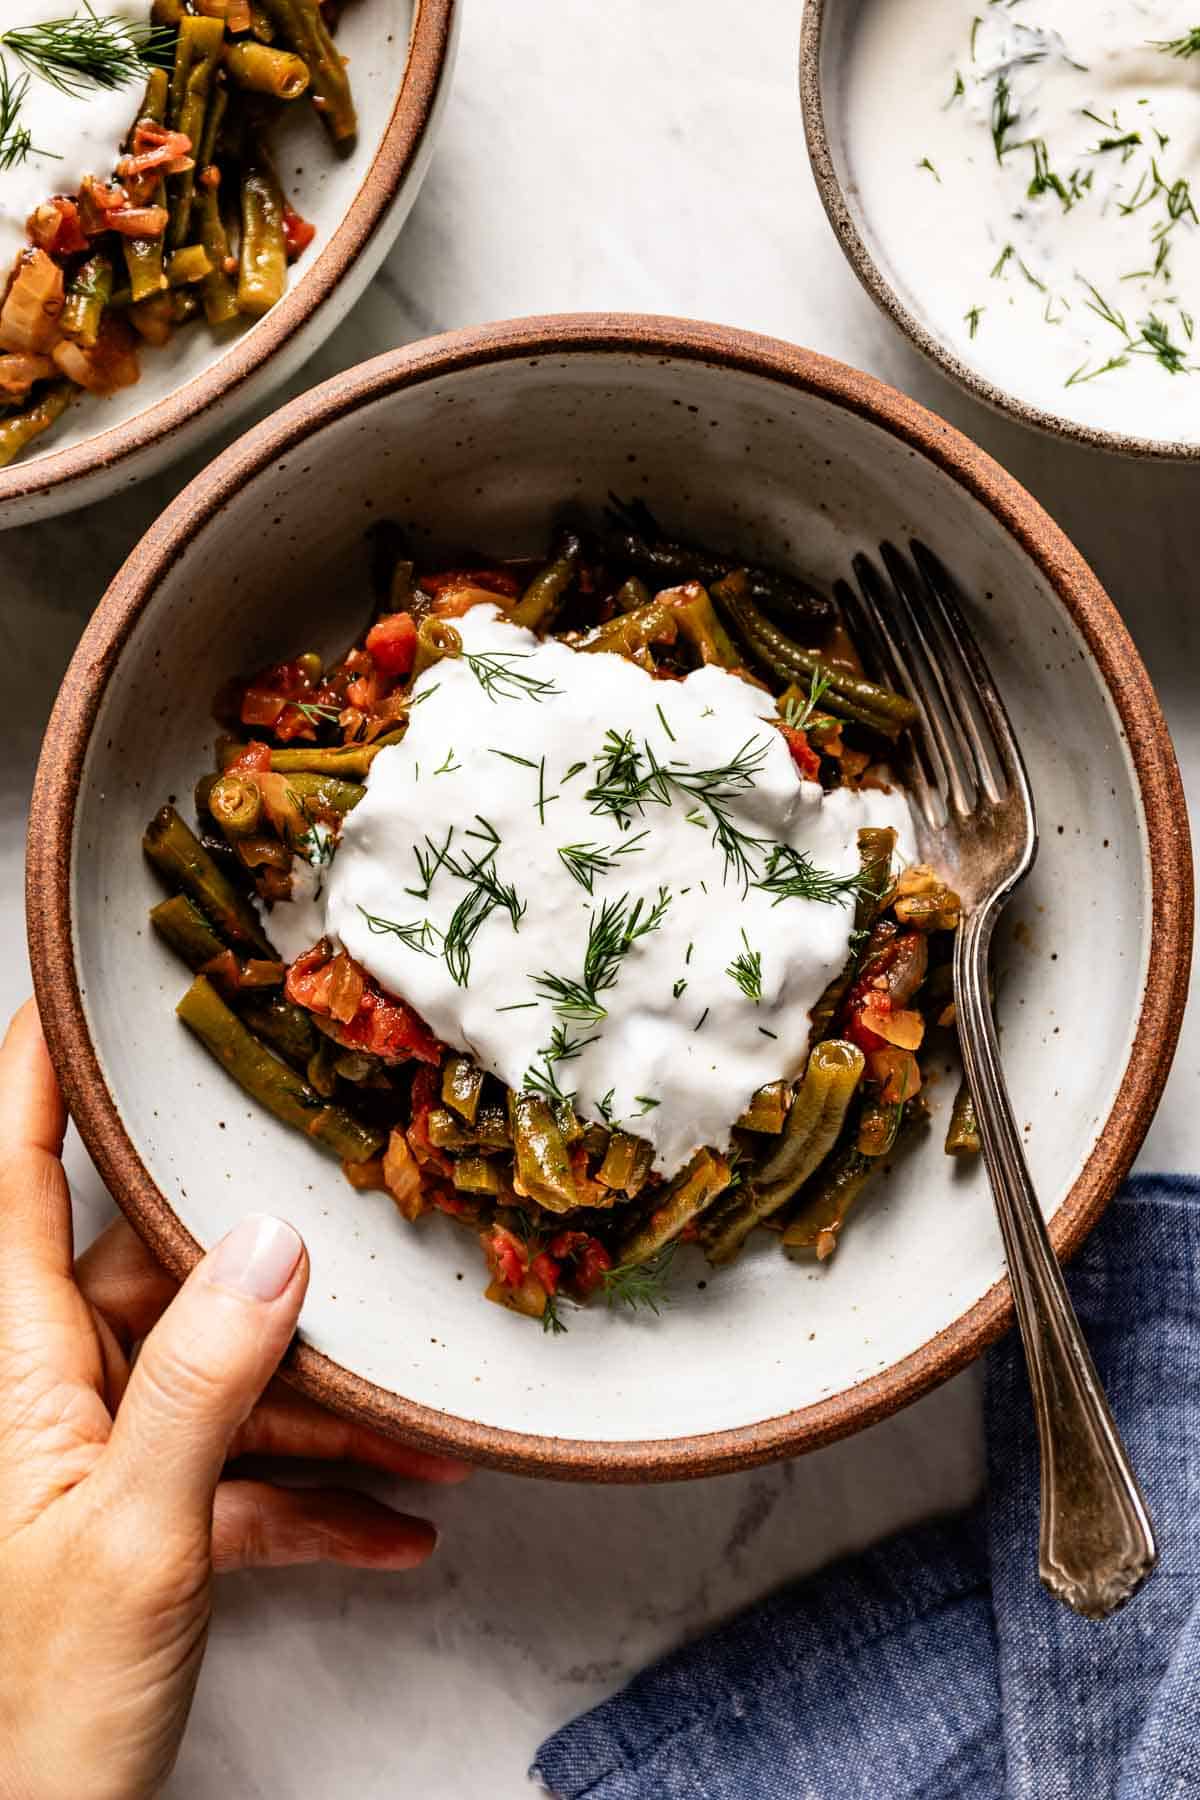 Turkish stewed green beans drizzled with yogurt sauce in a bowl.